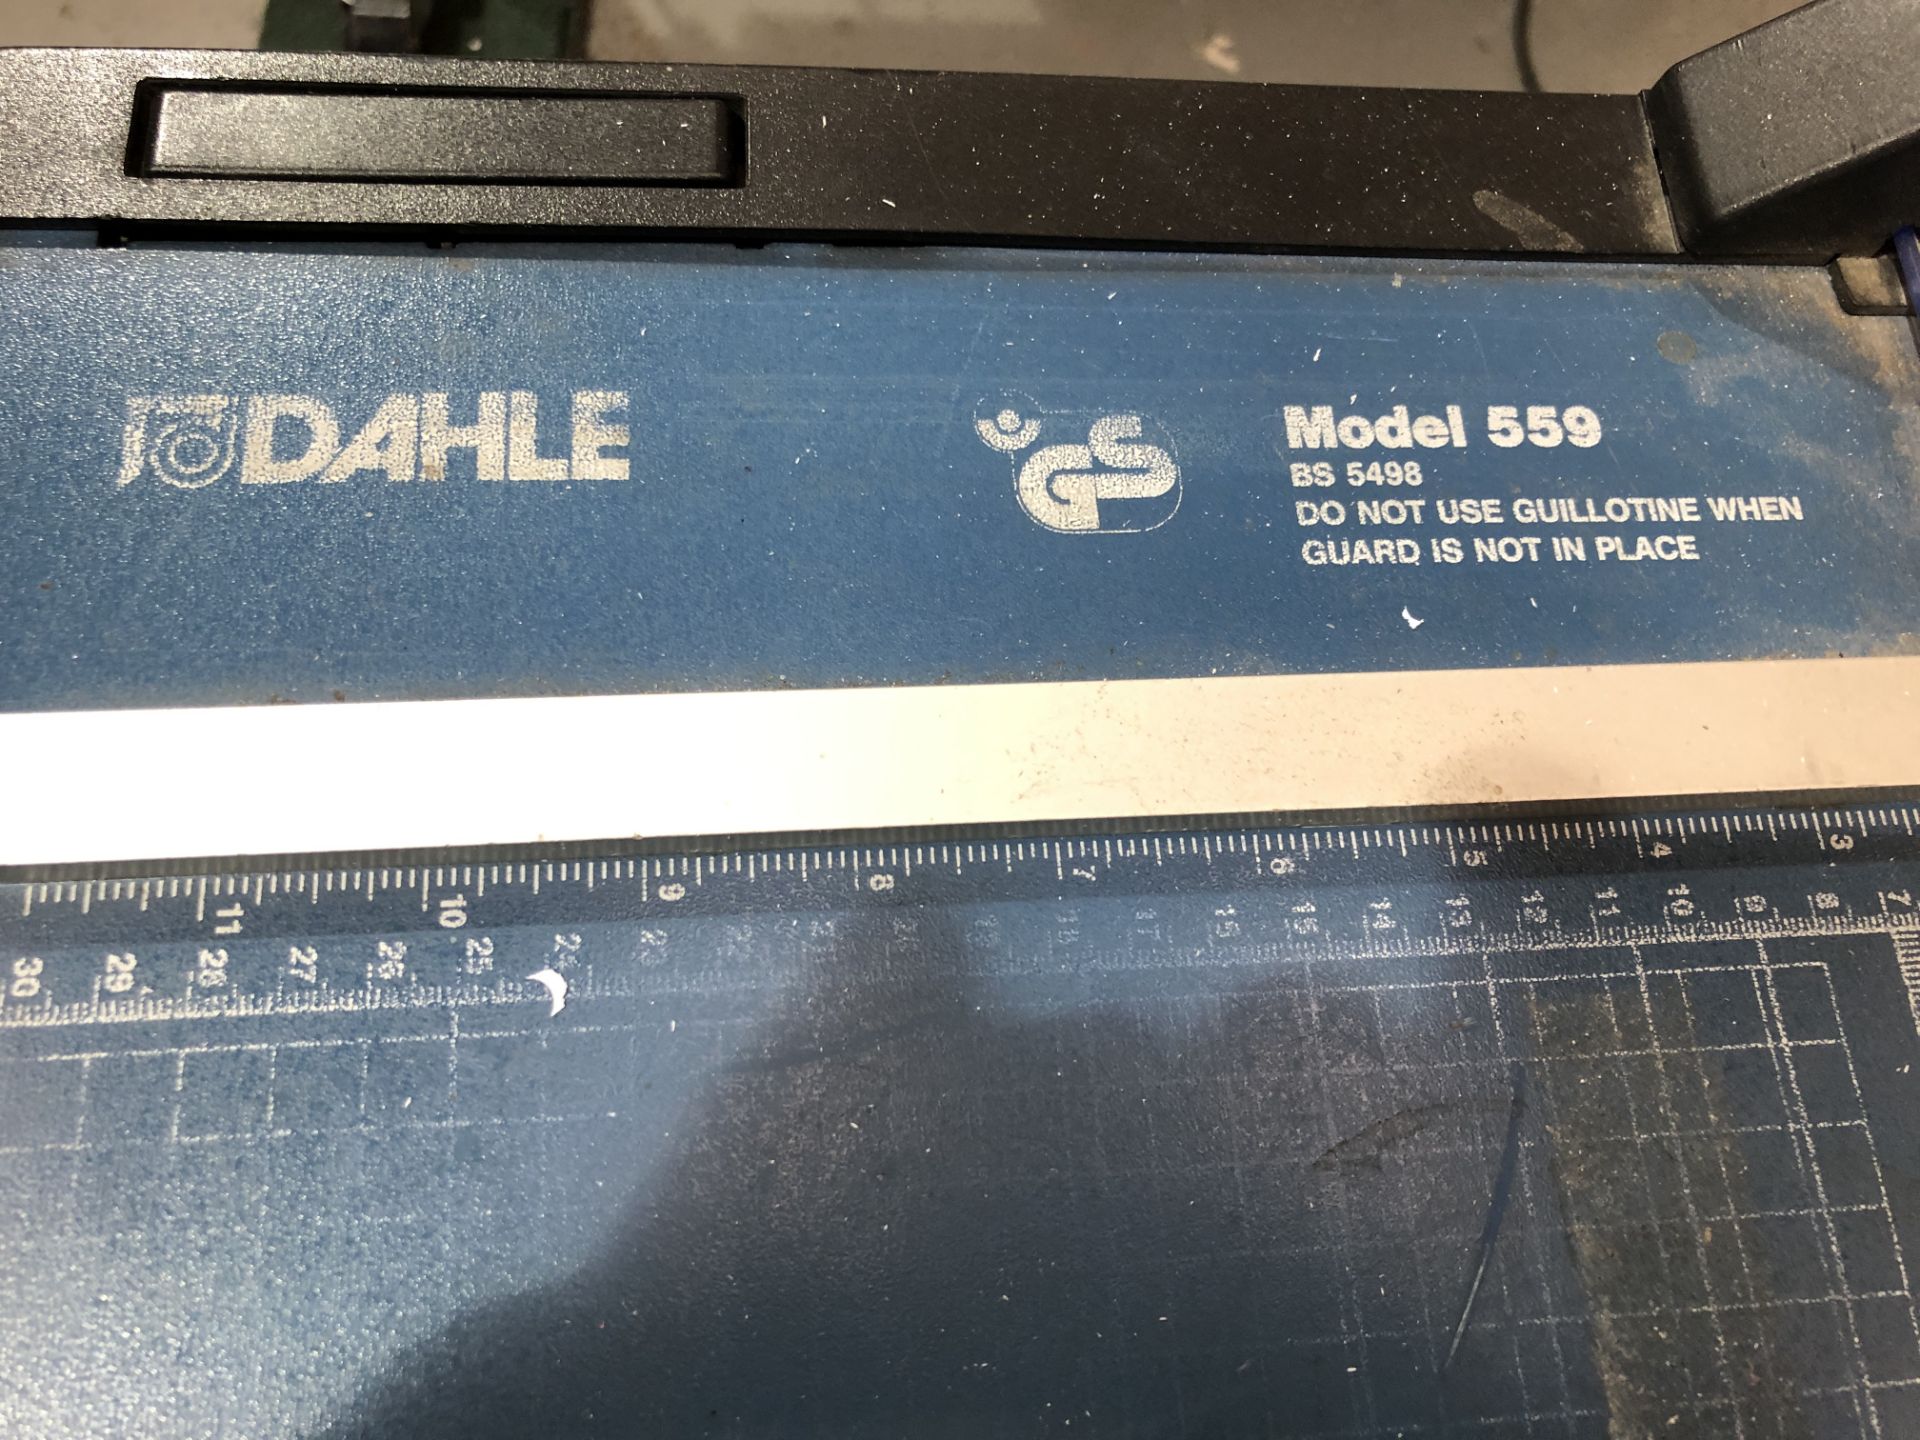 Dahle 559 Professional Rotary Trimmer on Stand - Image 4 of 4